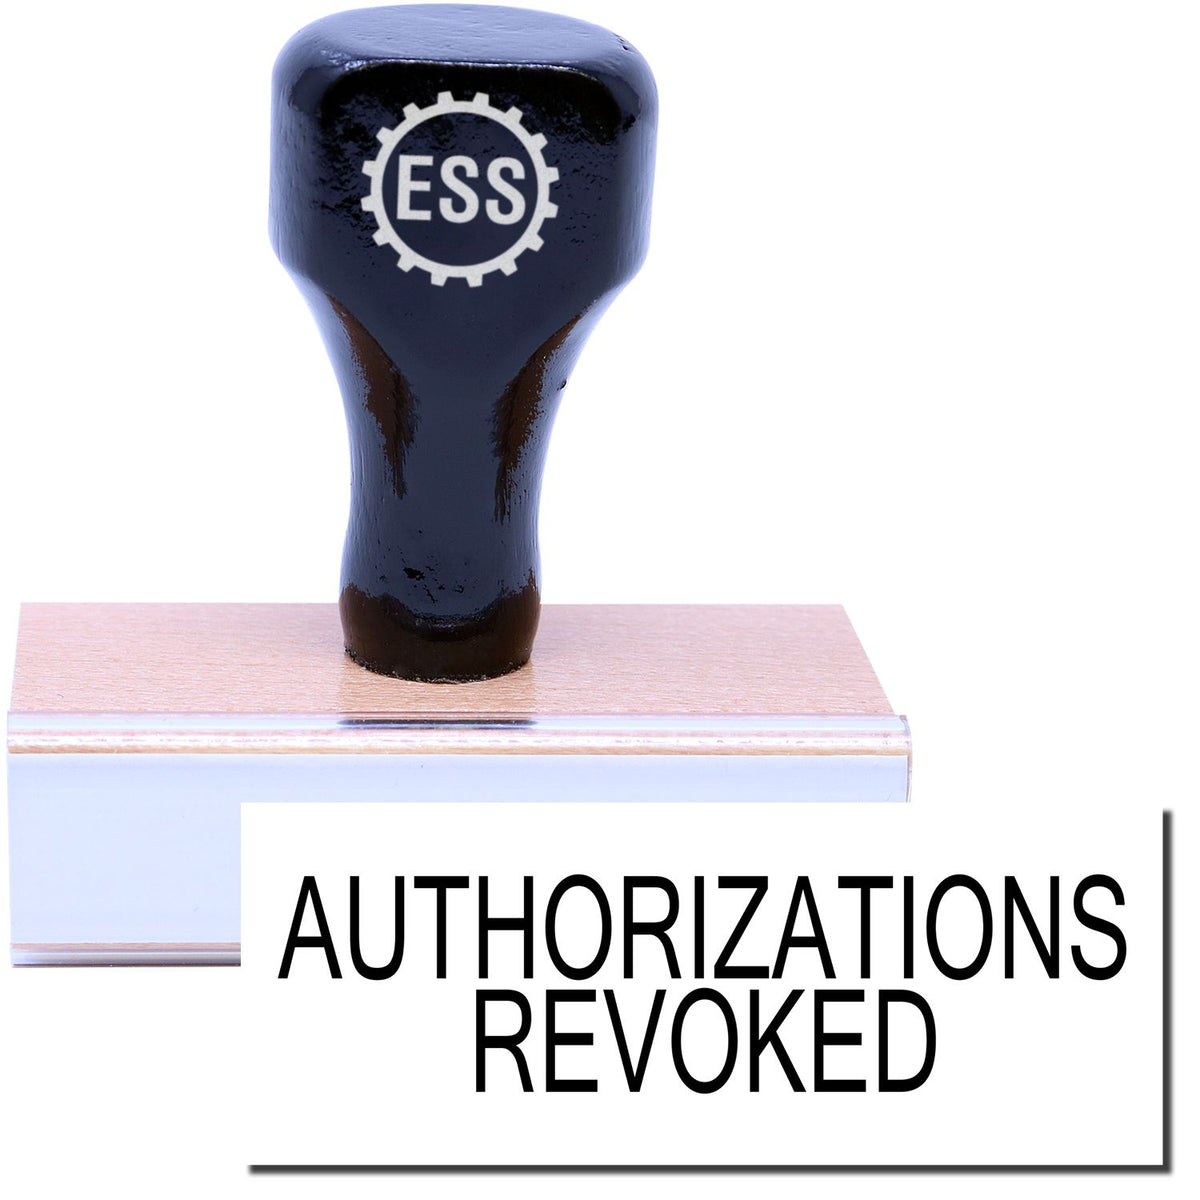 A stock office rubber stamp with a stamped image showing how the text &quot;AUTHORIZATIONS REVOKED&quot; is displayed after stamping.